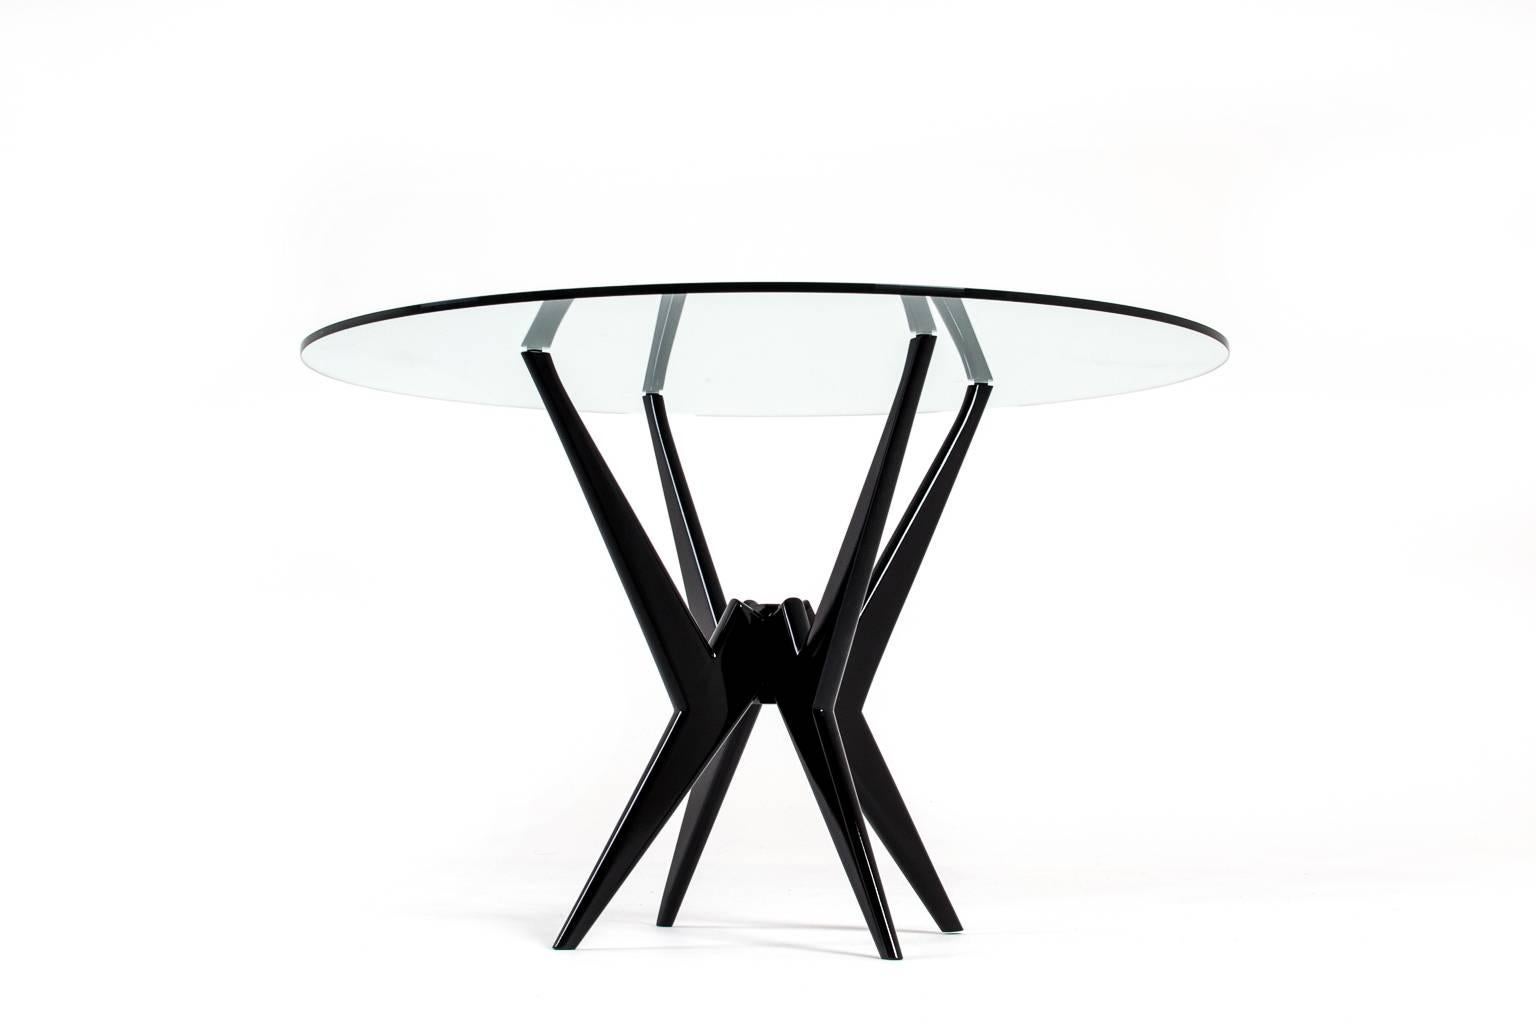 Stunning black lacquered round dining table attributed to Gianni Vigorelli, Italy, 1950s. Base out of sold wood finished in a high gloss black lacquer, on top lays the original thick round glass plate. Can be used both as a dining but also as a